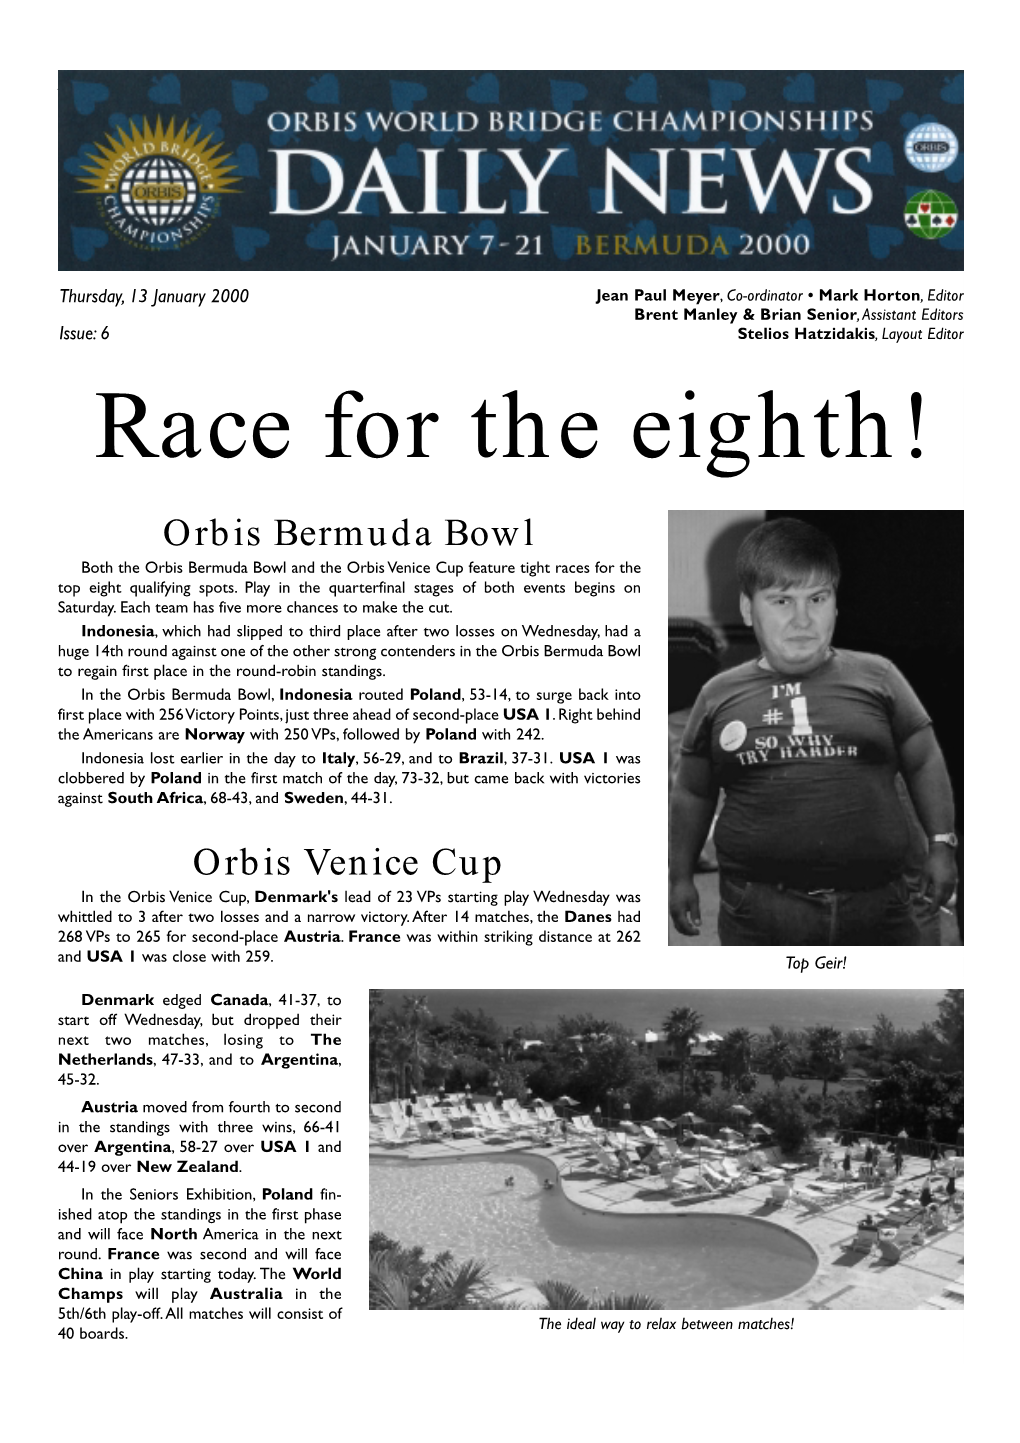 Orbis Bermuda Bowl Both the Orbis Bermuda Bowl and the Orbis Venice Cup Feature Tight Races for the Top Eight Qualifying Spots